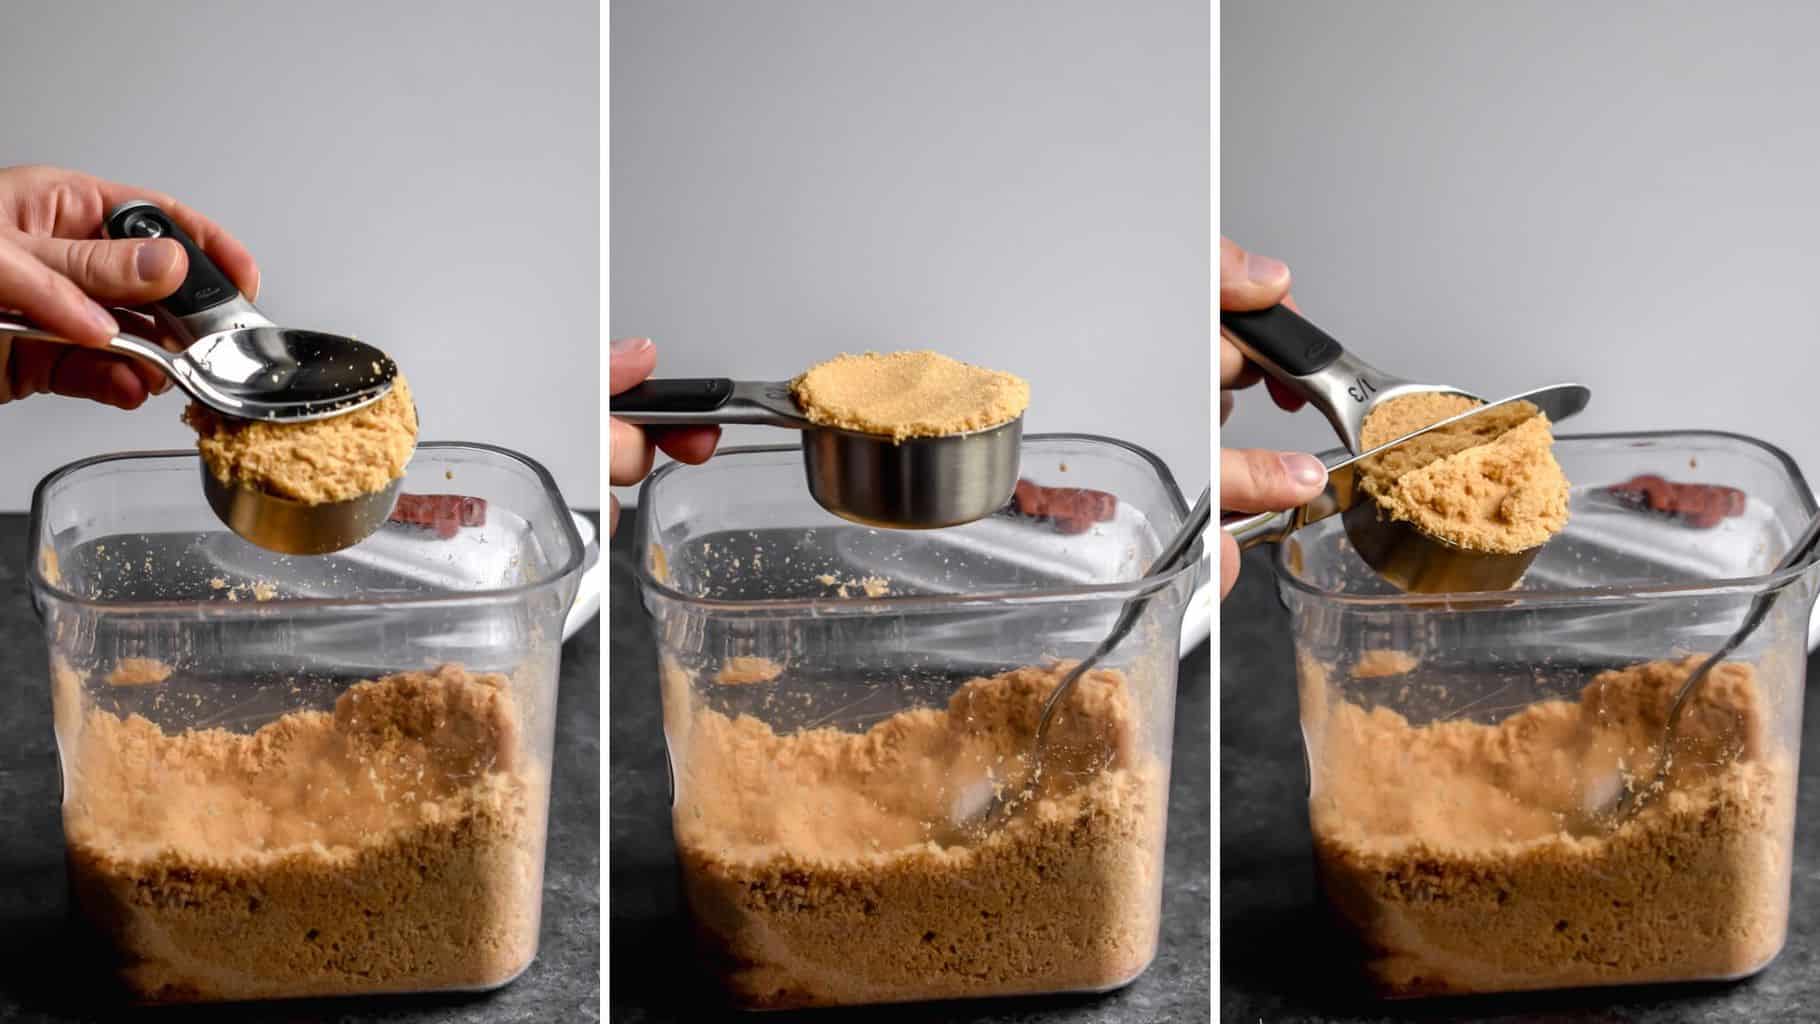 Three photos showing the process of measuring brown sugar